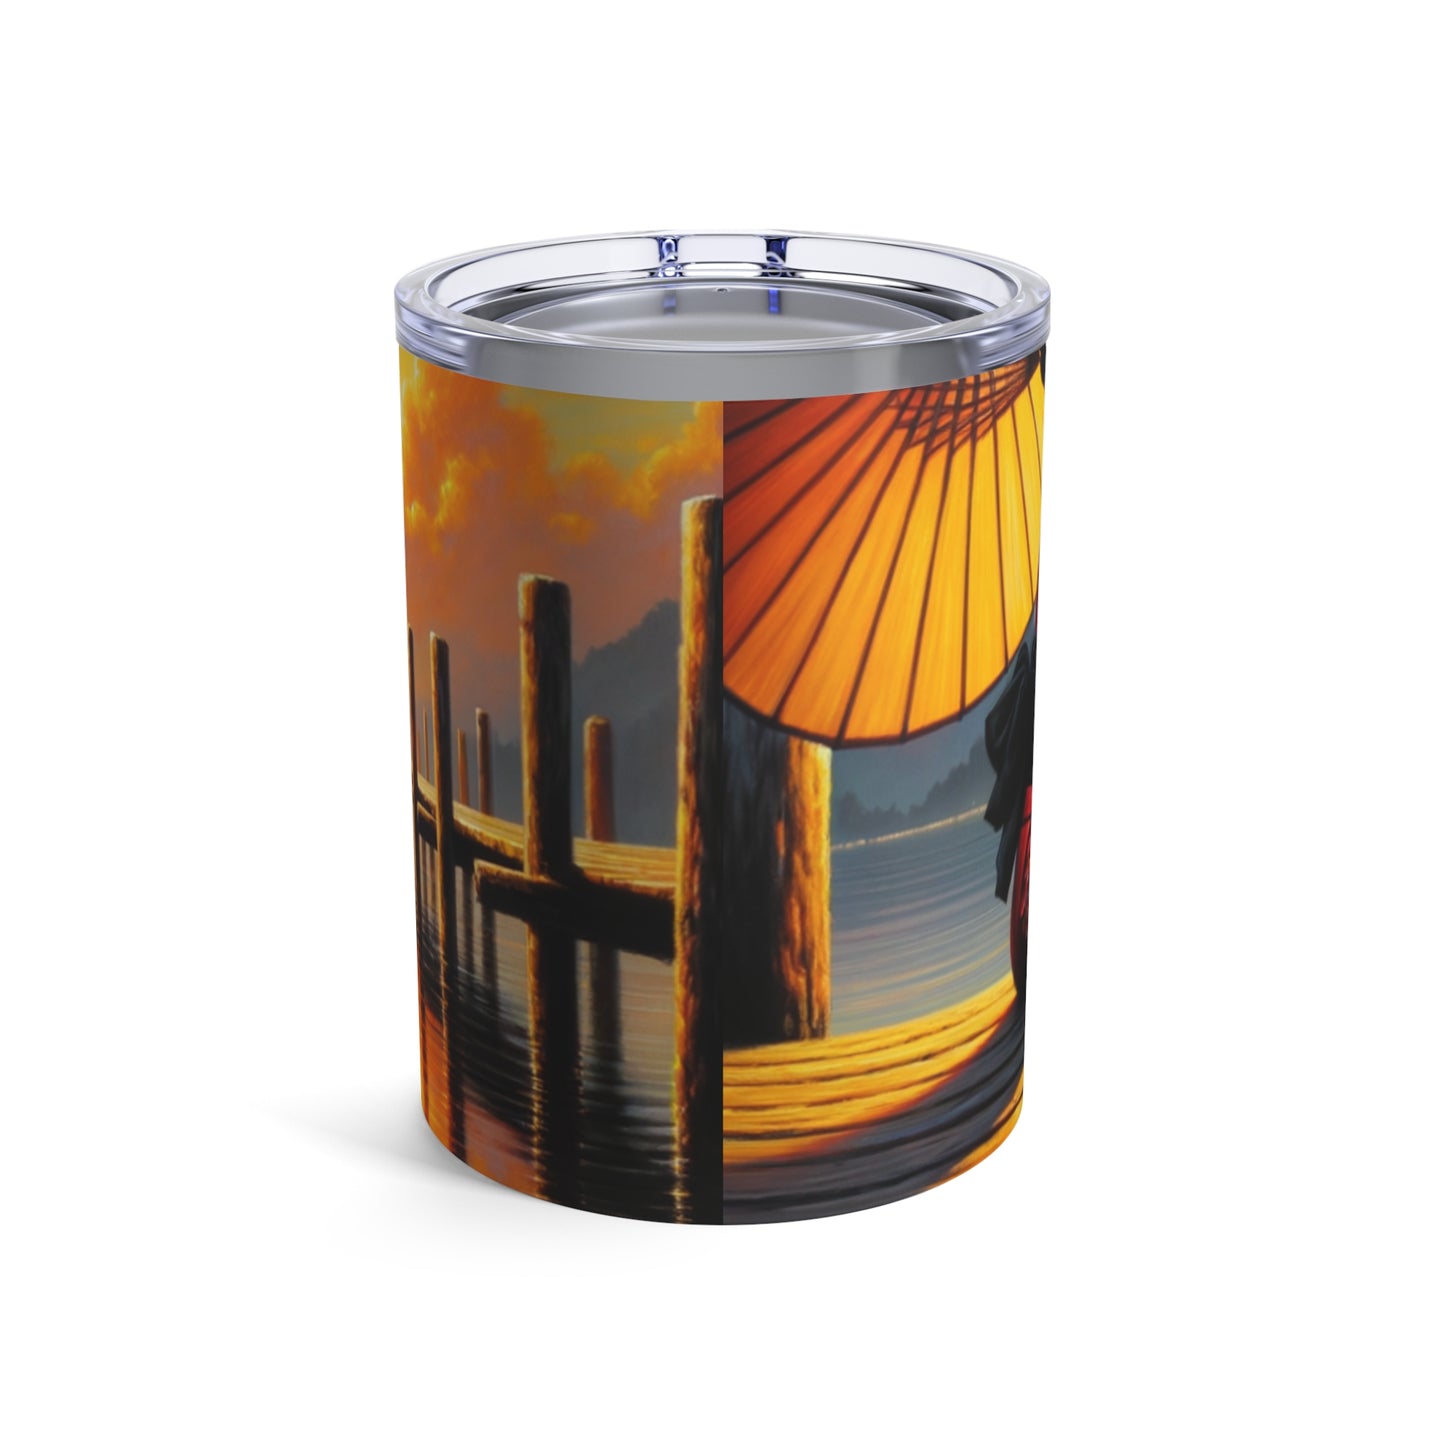 "Golden Reflections" - The Alien Tumbler 10oz Impressionism Style